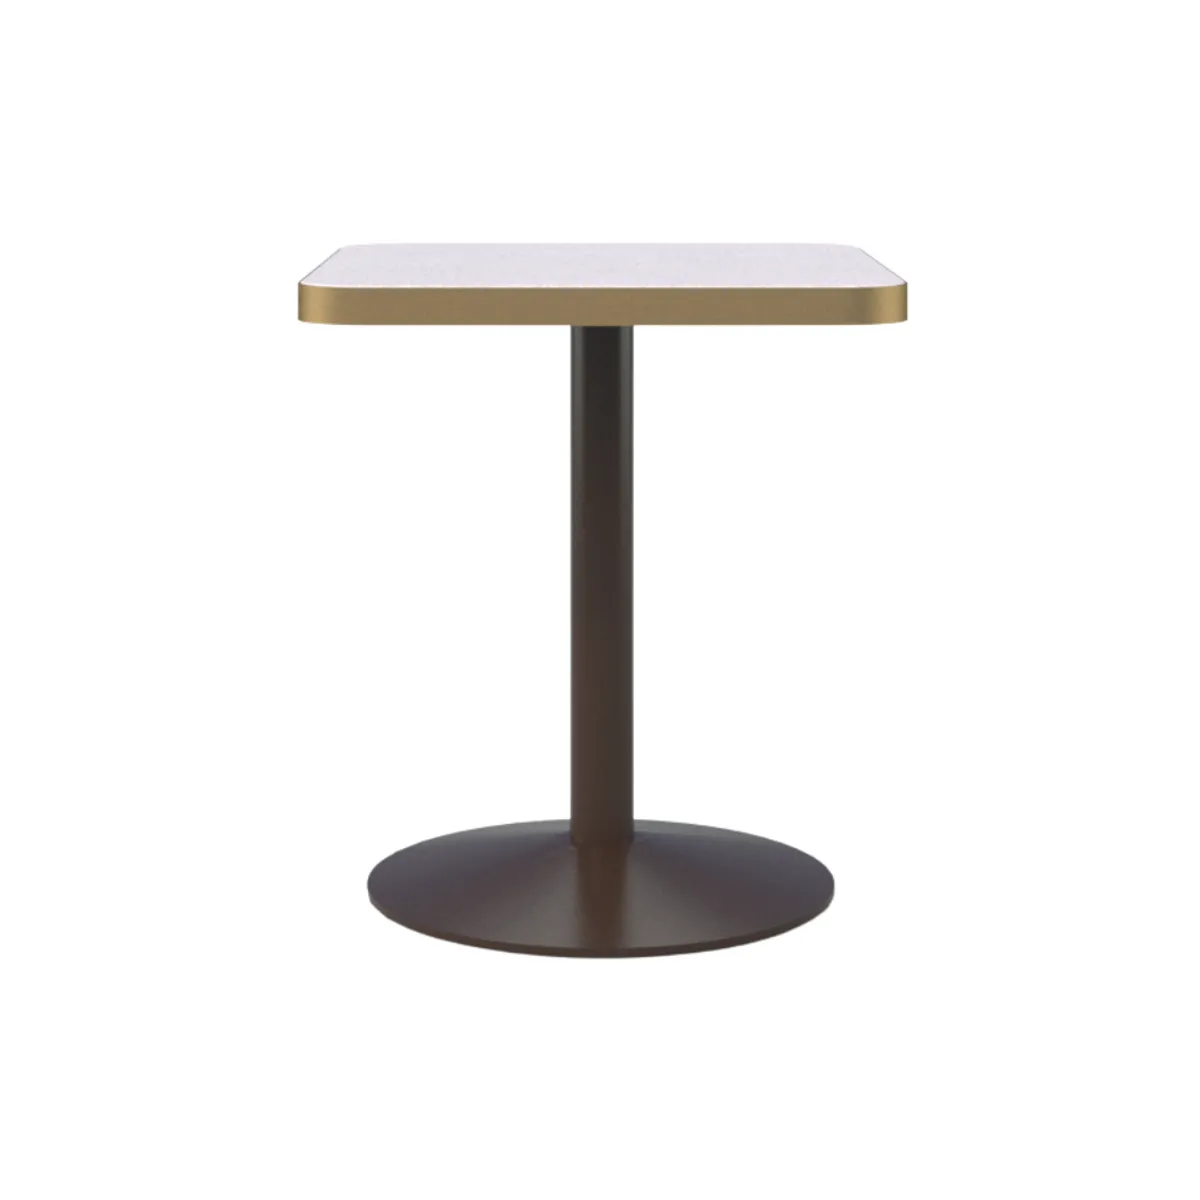 Gouqi square dining table 2